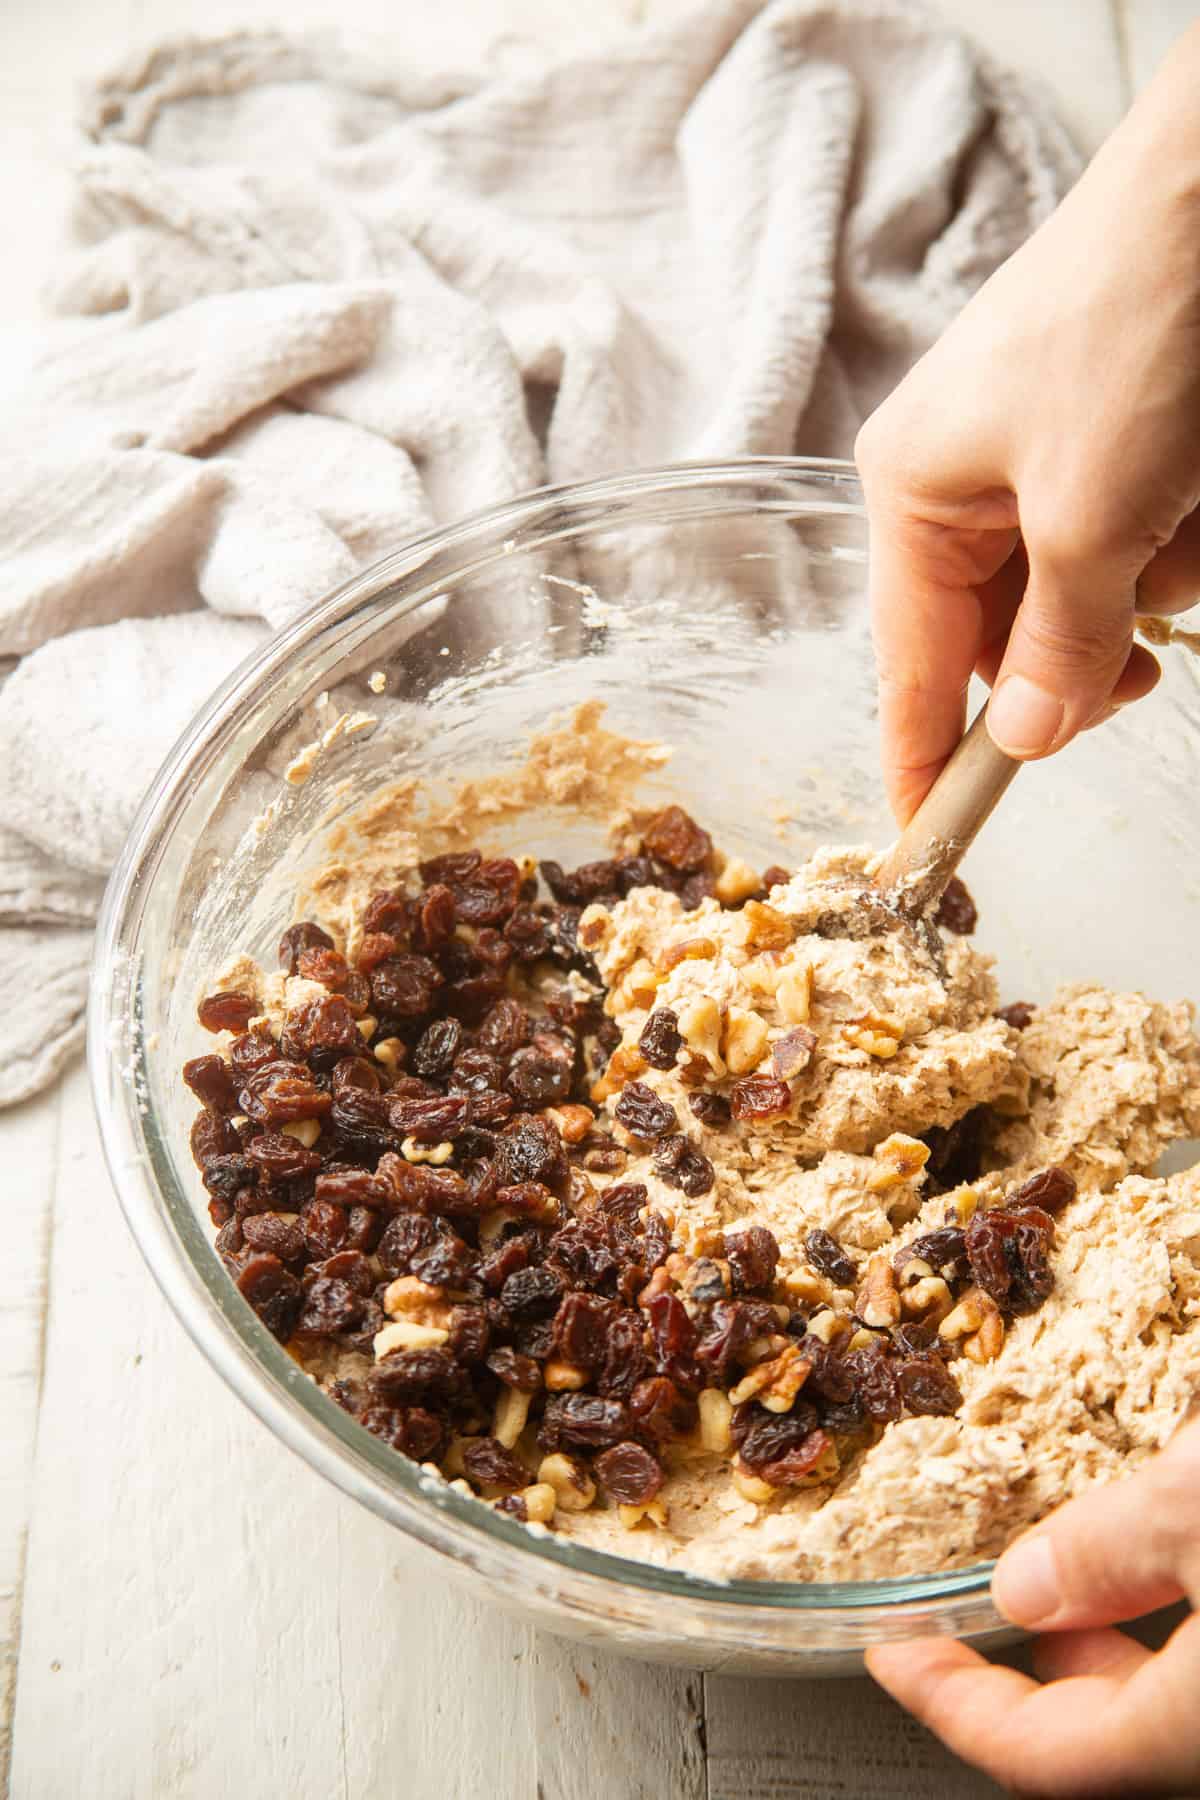 Hand stirring raisins and walnuts into a bowl of cookie dough.